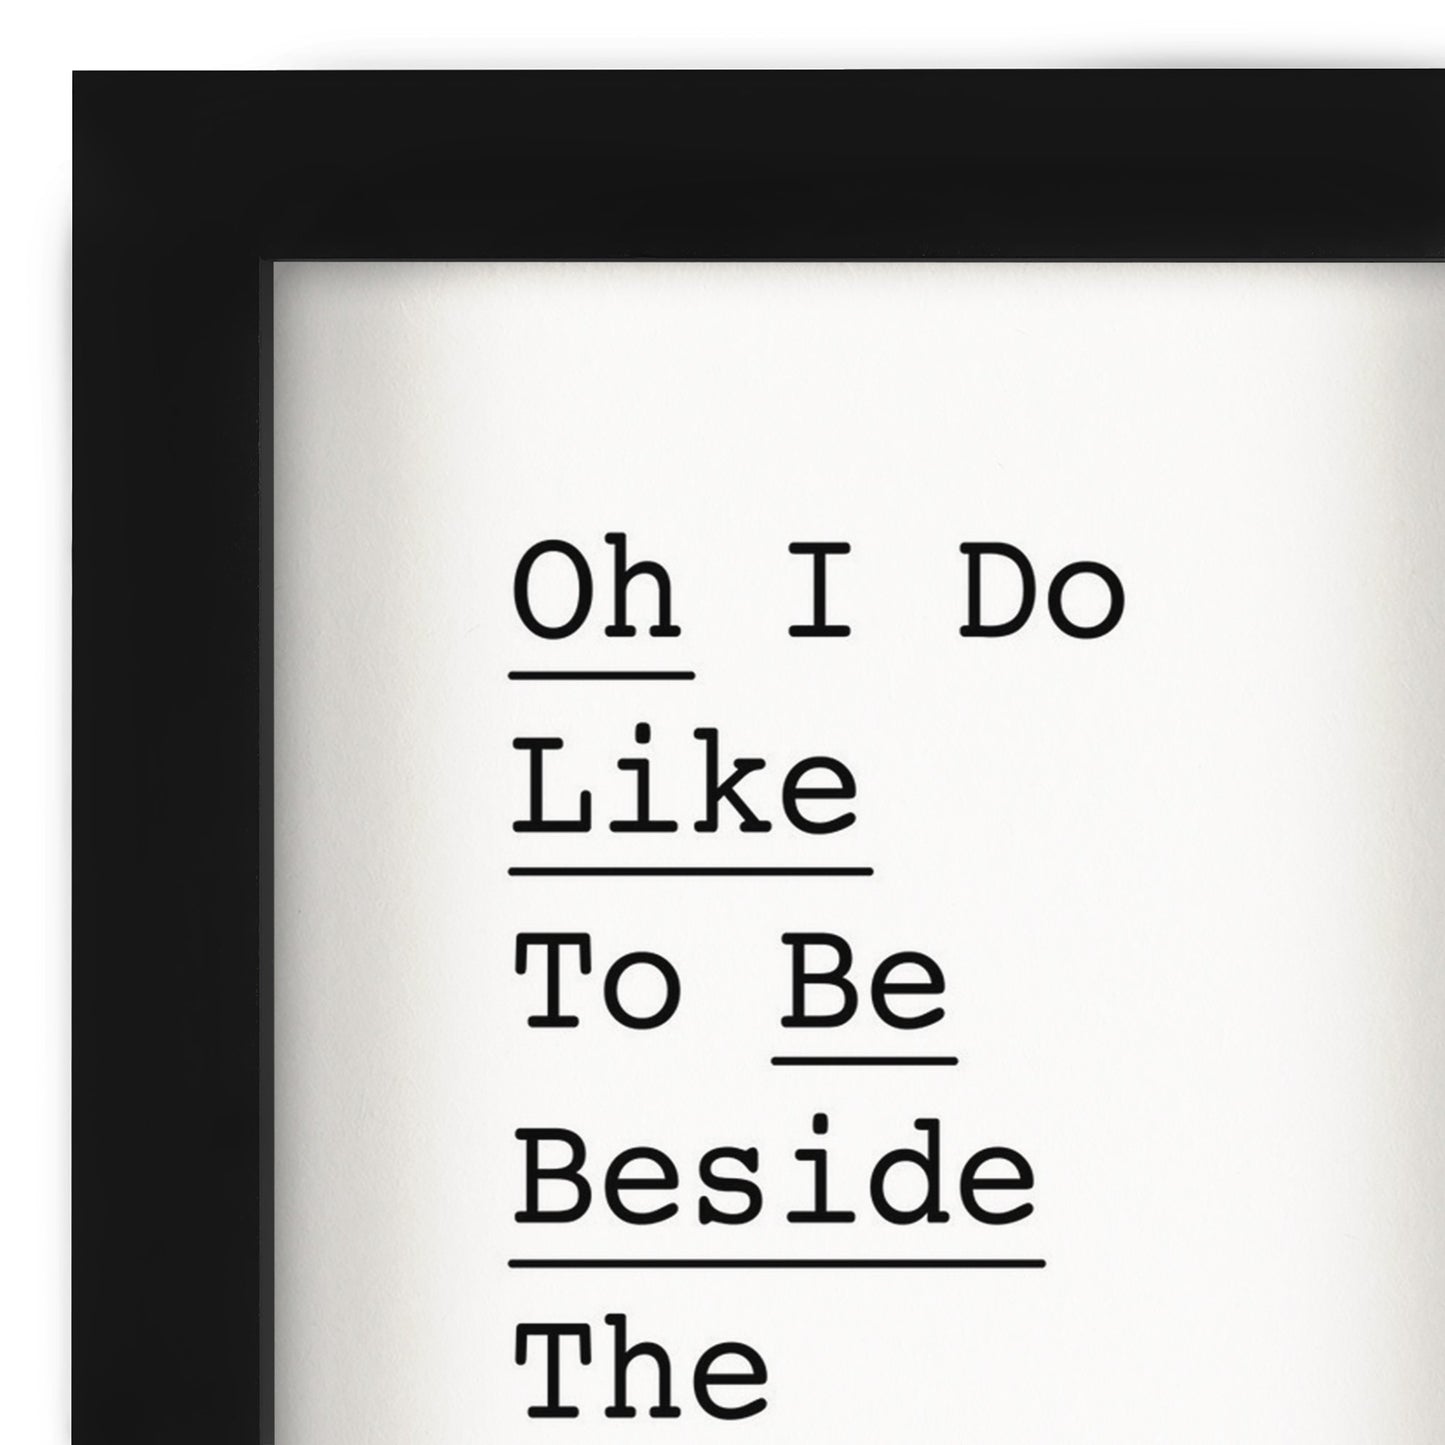 Oh I Do Like To Be Beside The Seaside 2 By Motivated Type - Shadow Box Framed Art - Americanflat